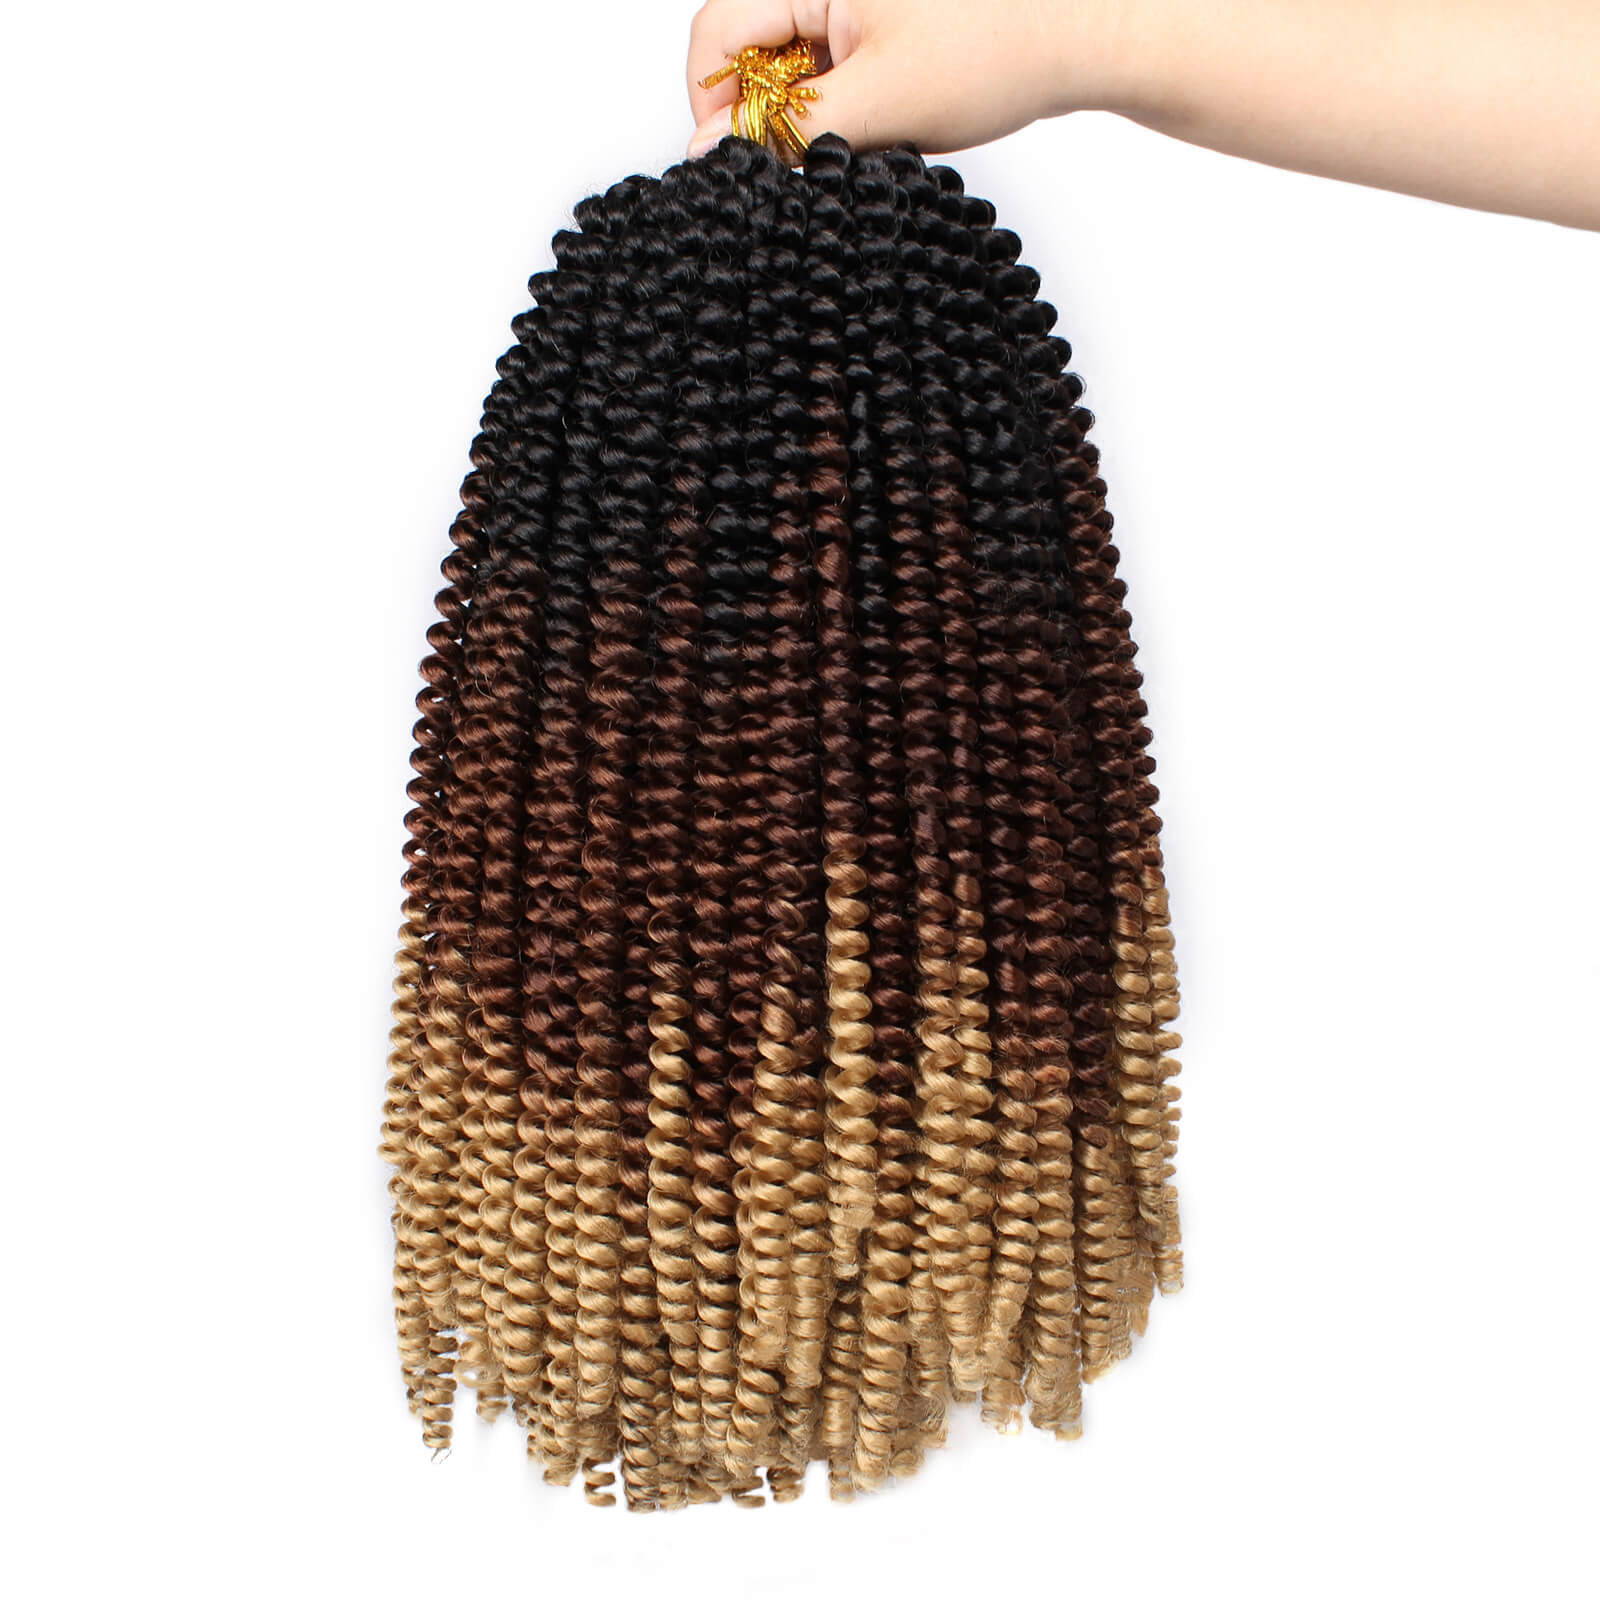 12 Inch Spring Twist Ombre Colors Butterfly locs Crochet Braids Synthetic Hair Extensions